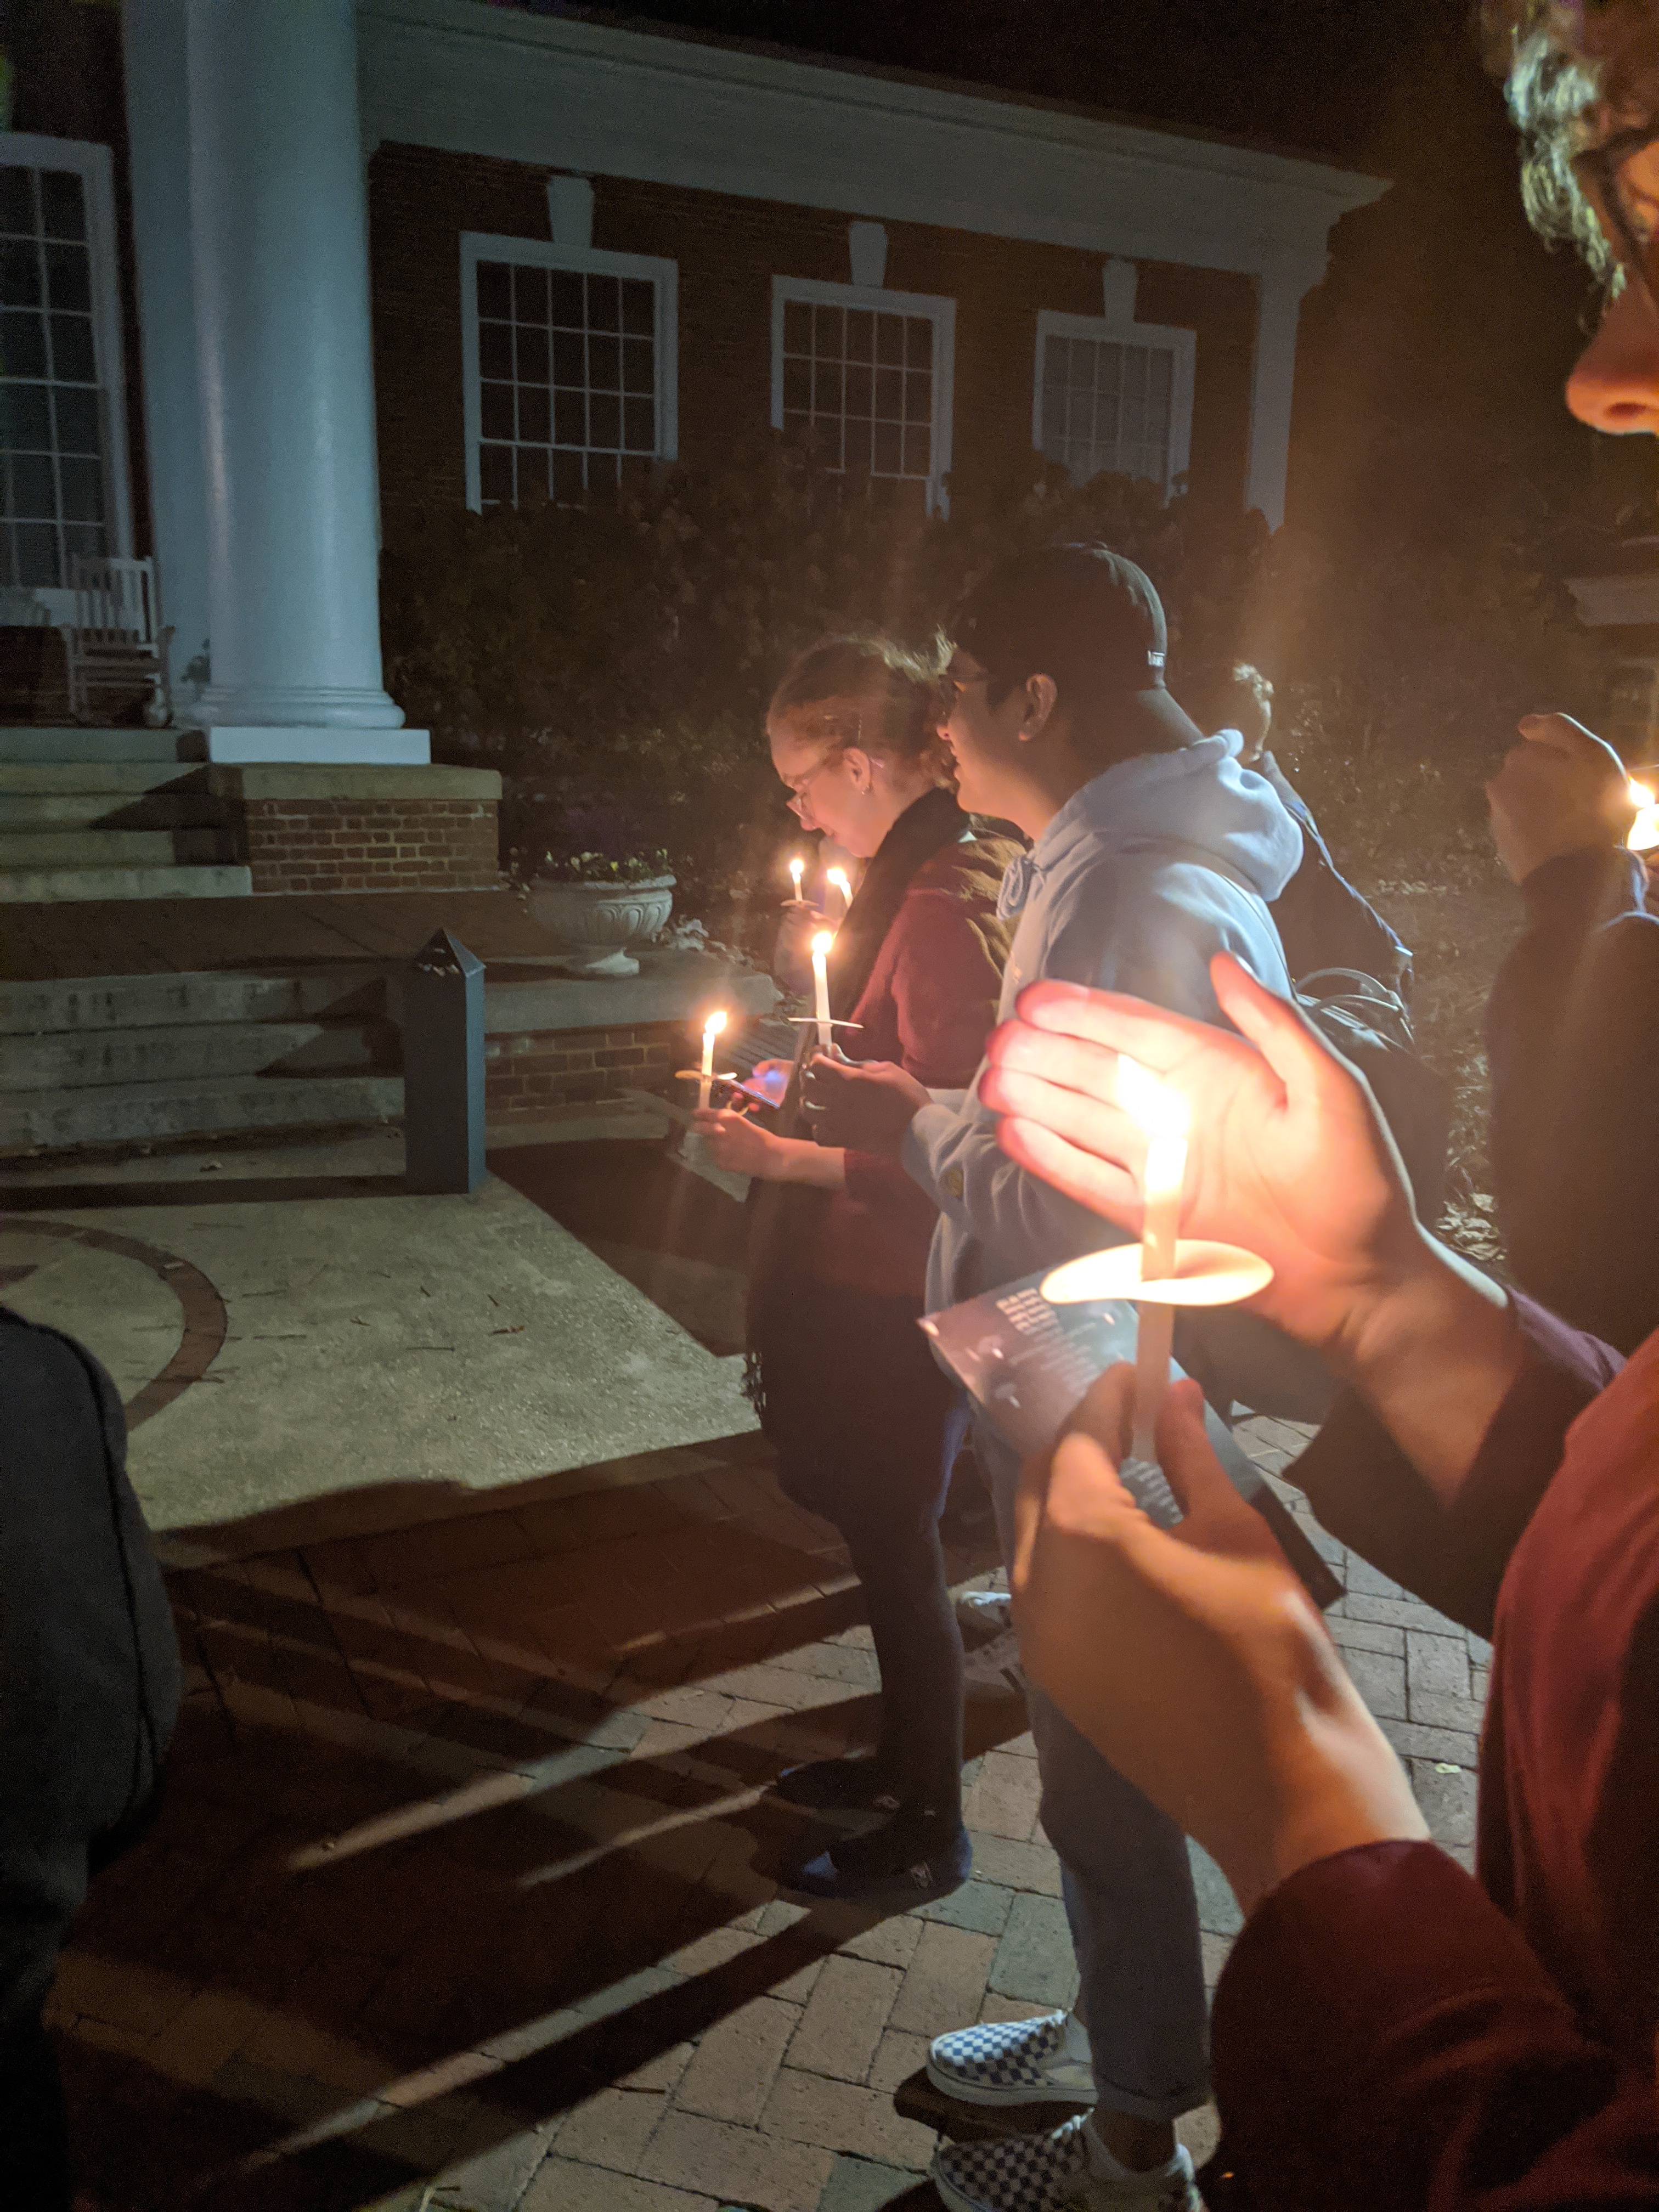 Attendees holding vigil candles